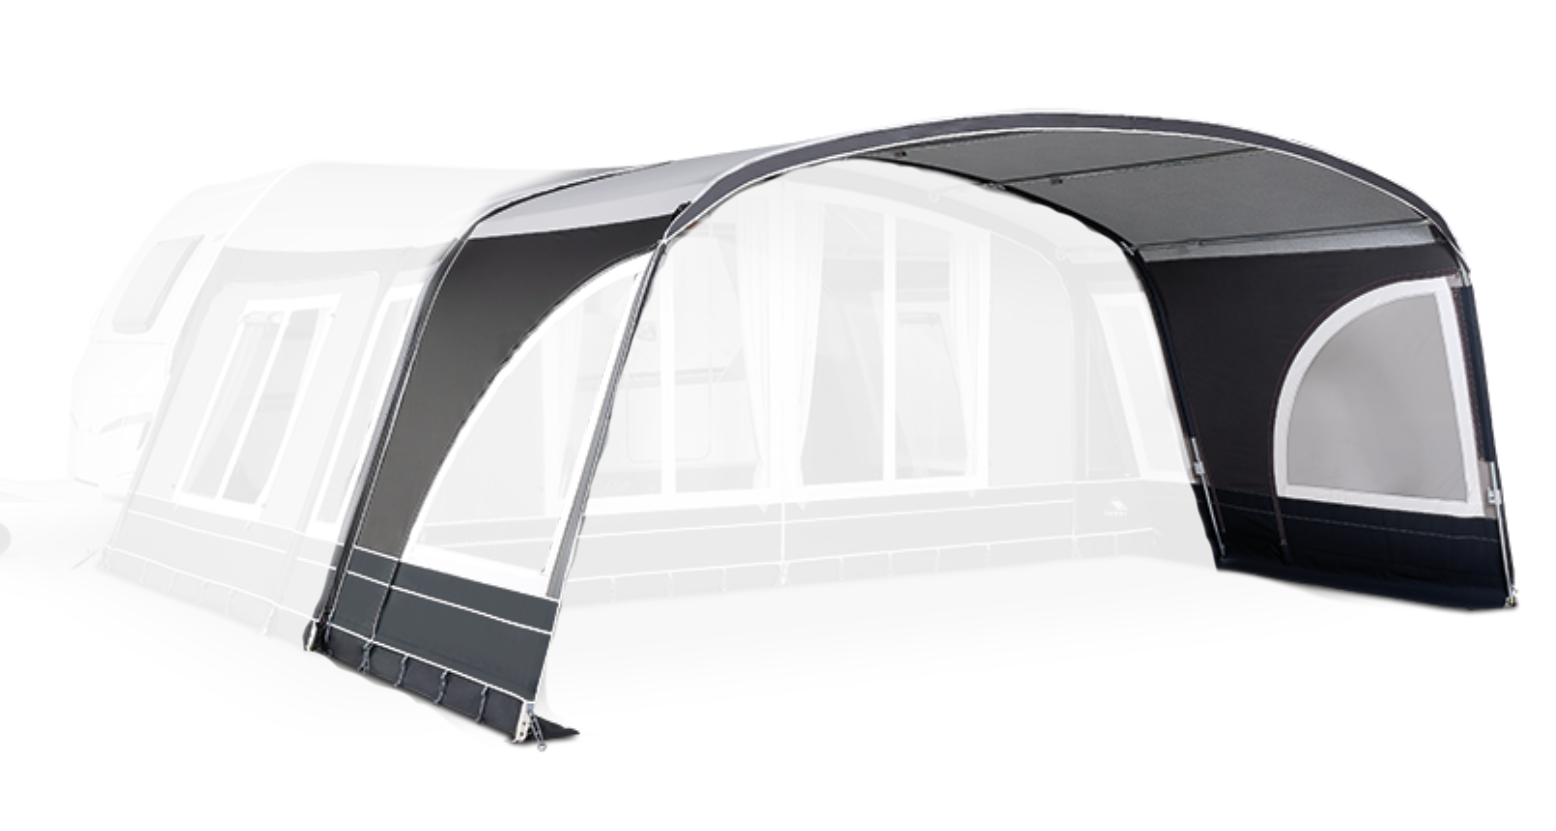 dorema onyx 270 caravan awning sun canopy with side in-fill panels 2022 collection